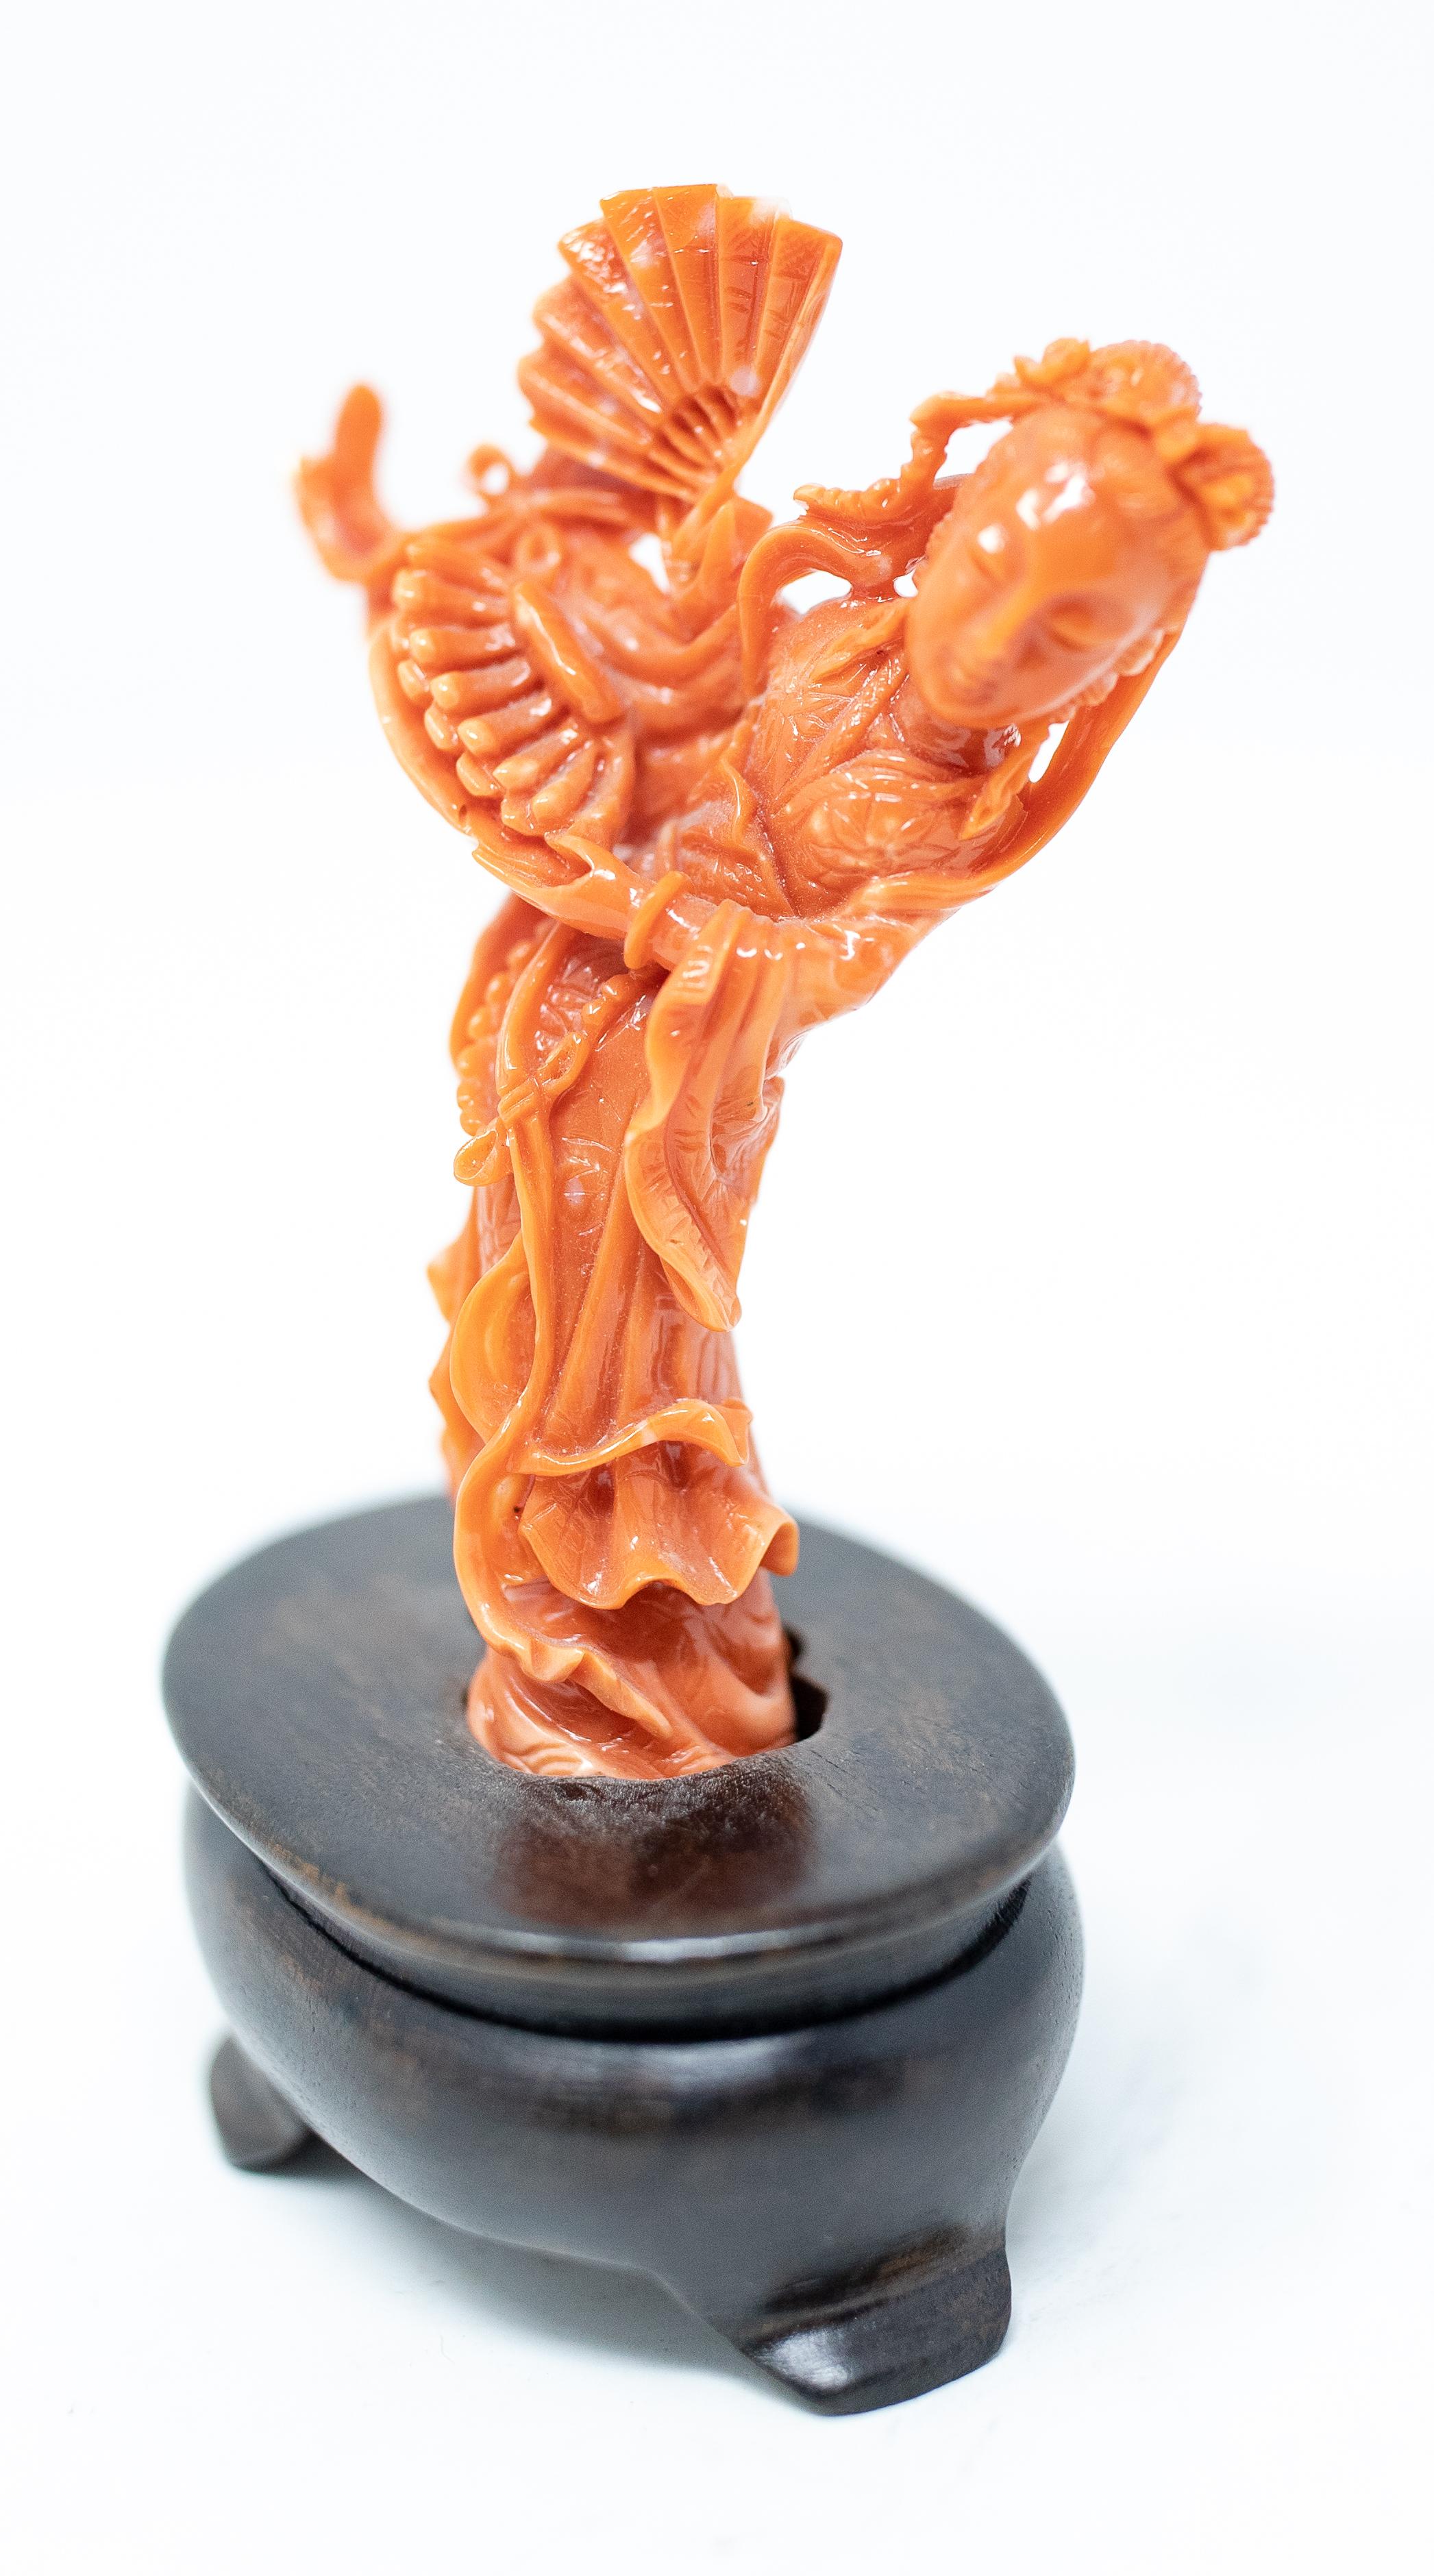 Offering this stunning hand carved Coral figure of a Geisha on a wooden base. The coral is very vibrant and the carving it absolutely stunning. This coral is intricate, and the geisha has beautiful flowing gowns and ropes as her dress. She is